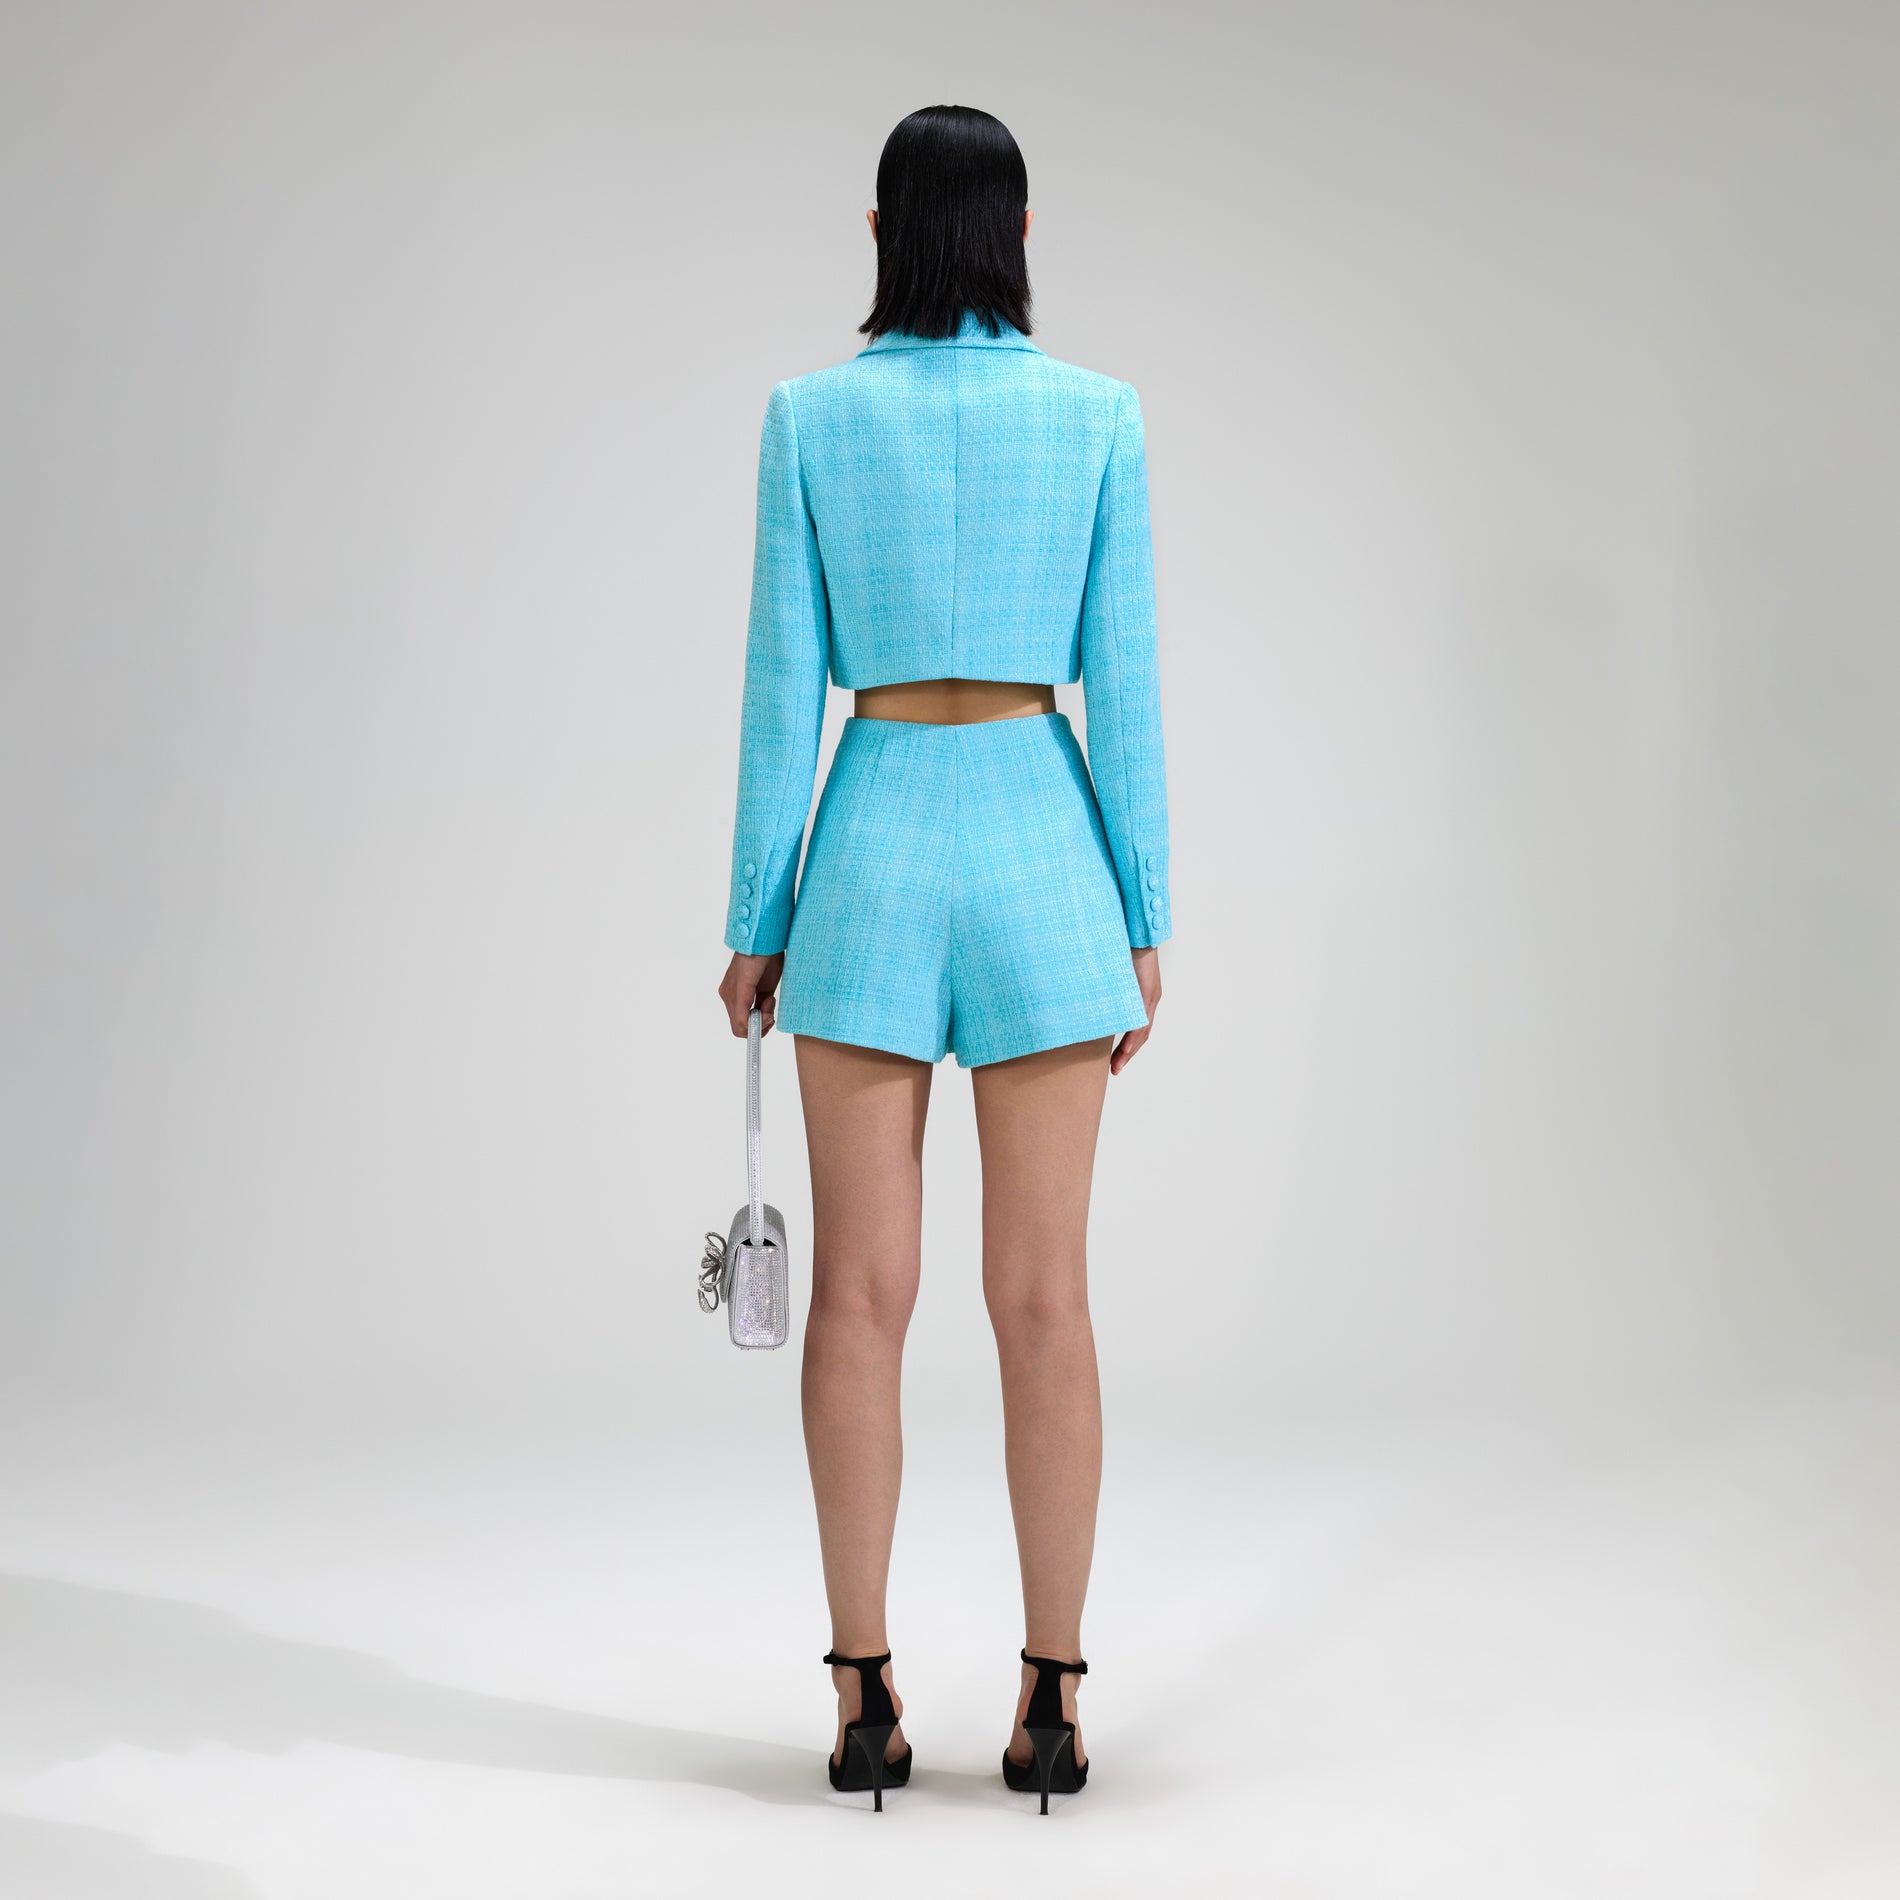 A woman wearing the Blue Boucle Skort